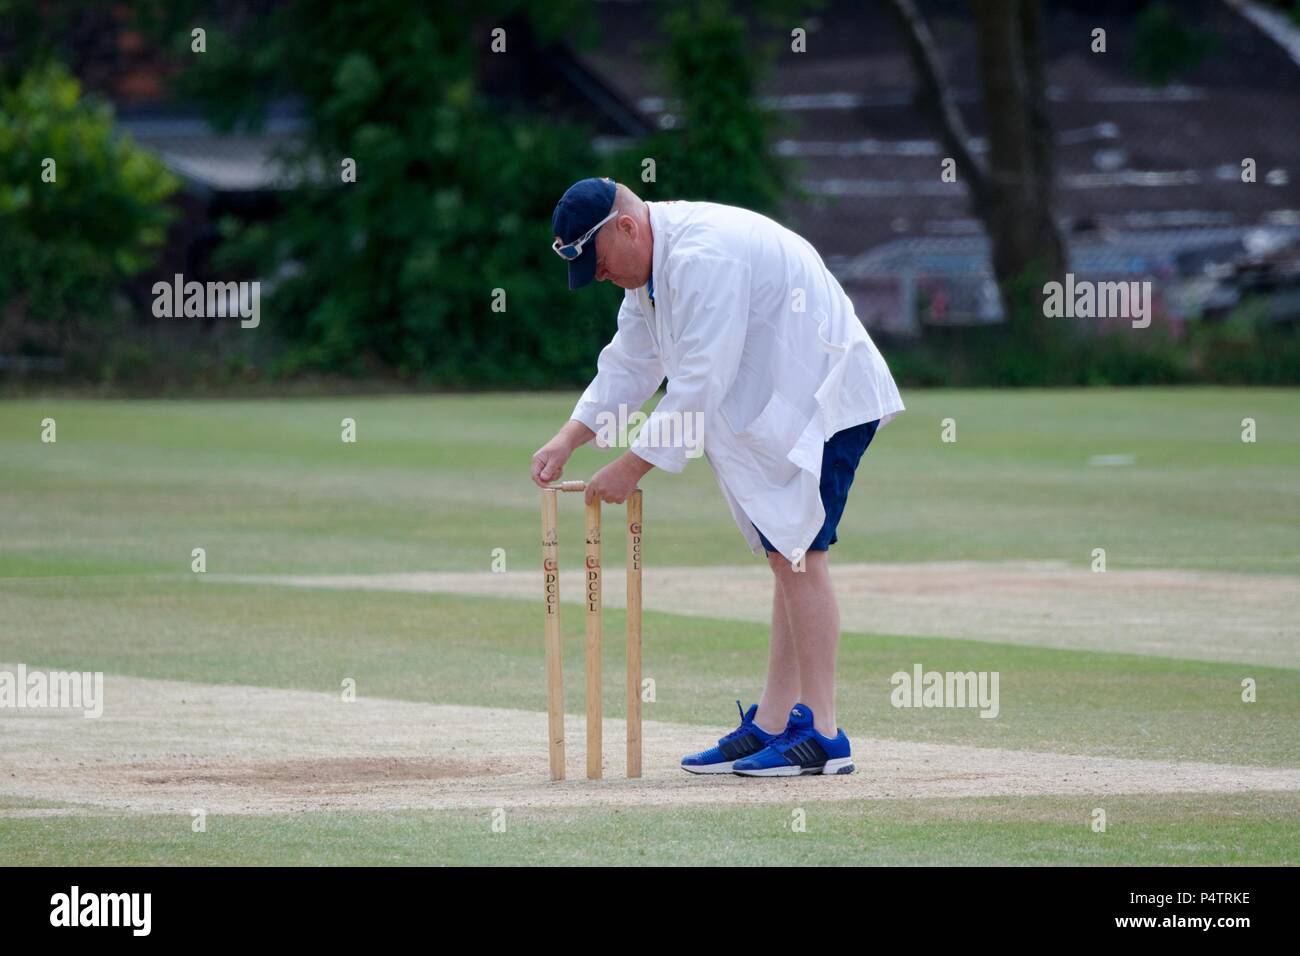 An umpire puts the bails on the wickets before the start of a sec on eleven cricket match between New Mills and Mottram. Stock Photo